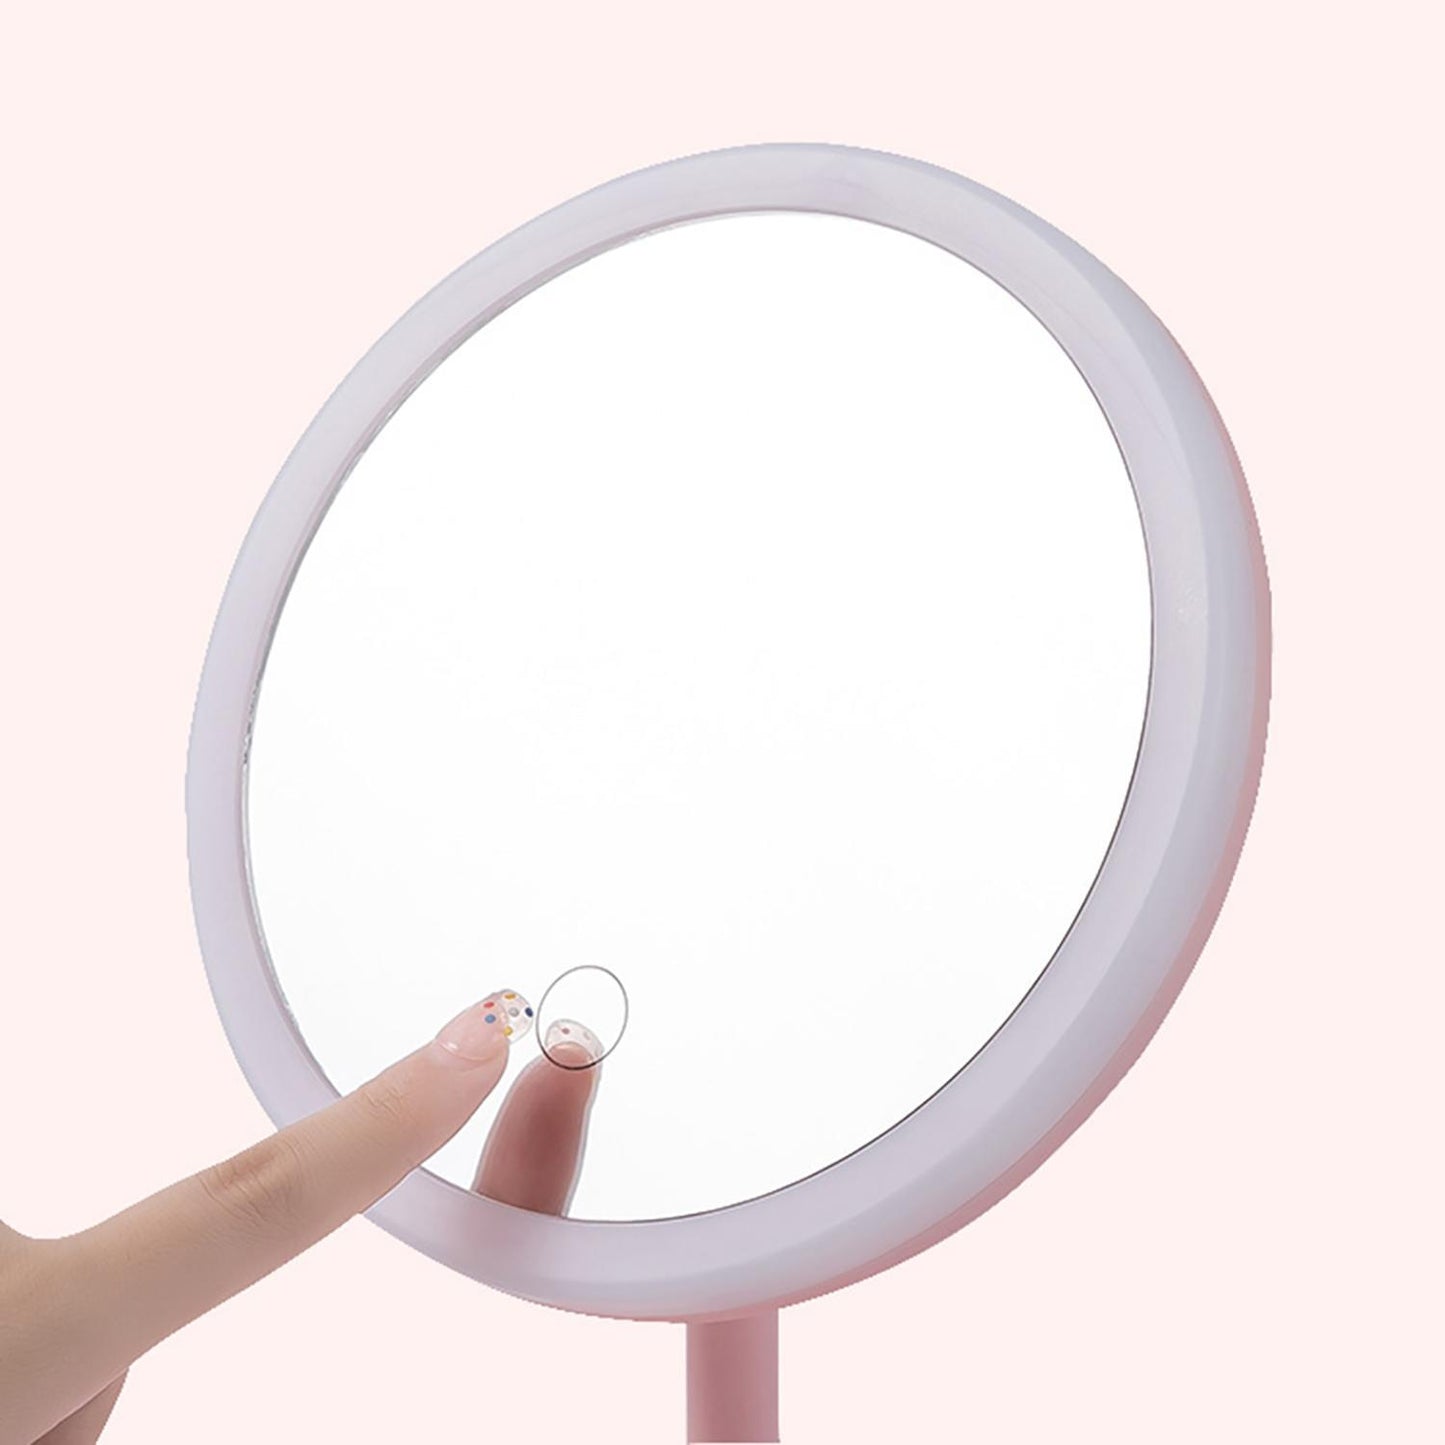 Portable Makeup Mirror with LED Fill Light, Rechargeable Touch Desktop Mirror with 3 Color Lighting